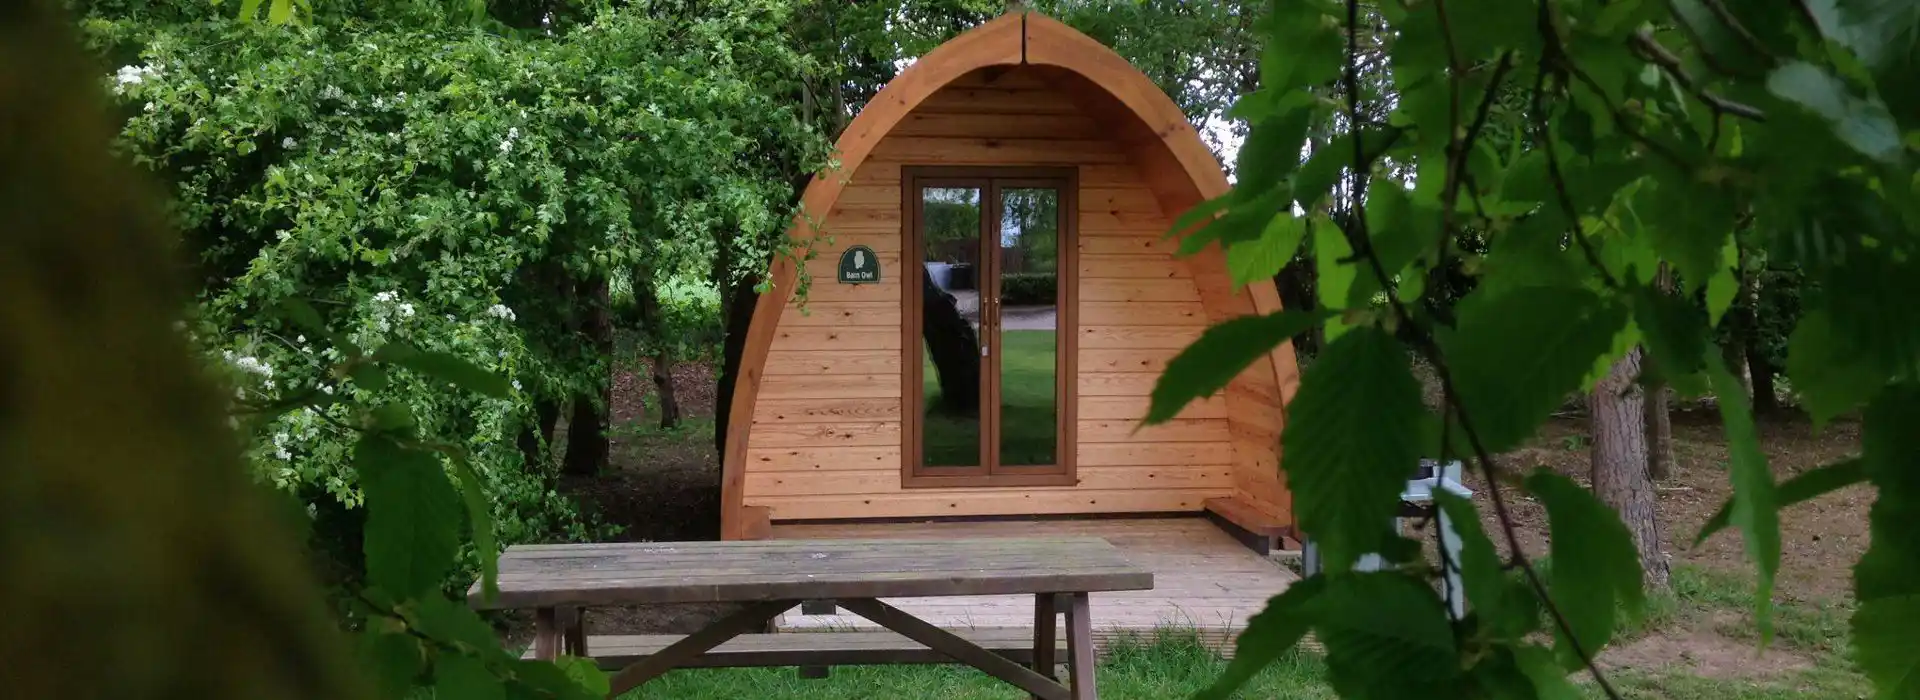 Camping pods in Herefordshire